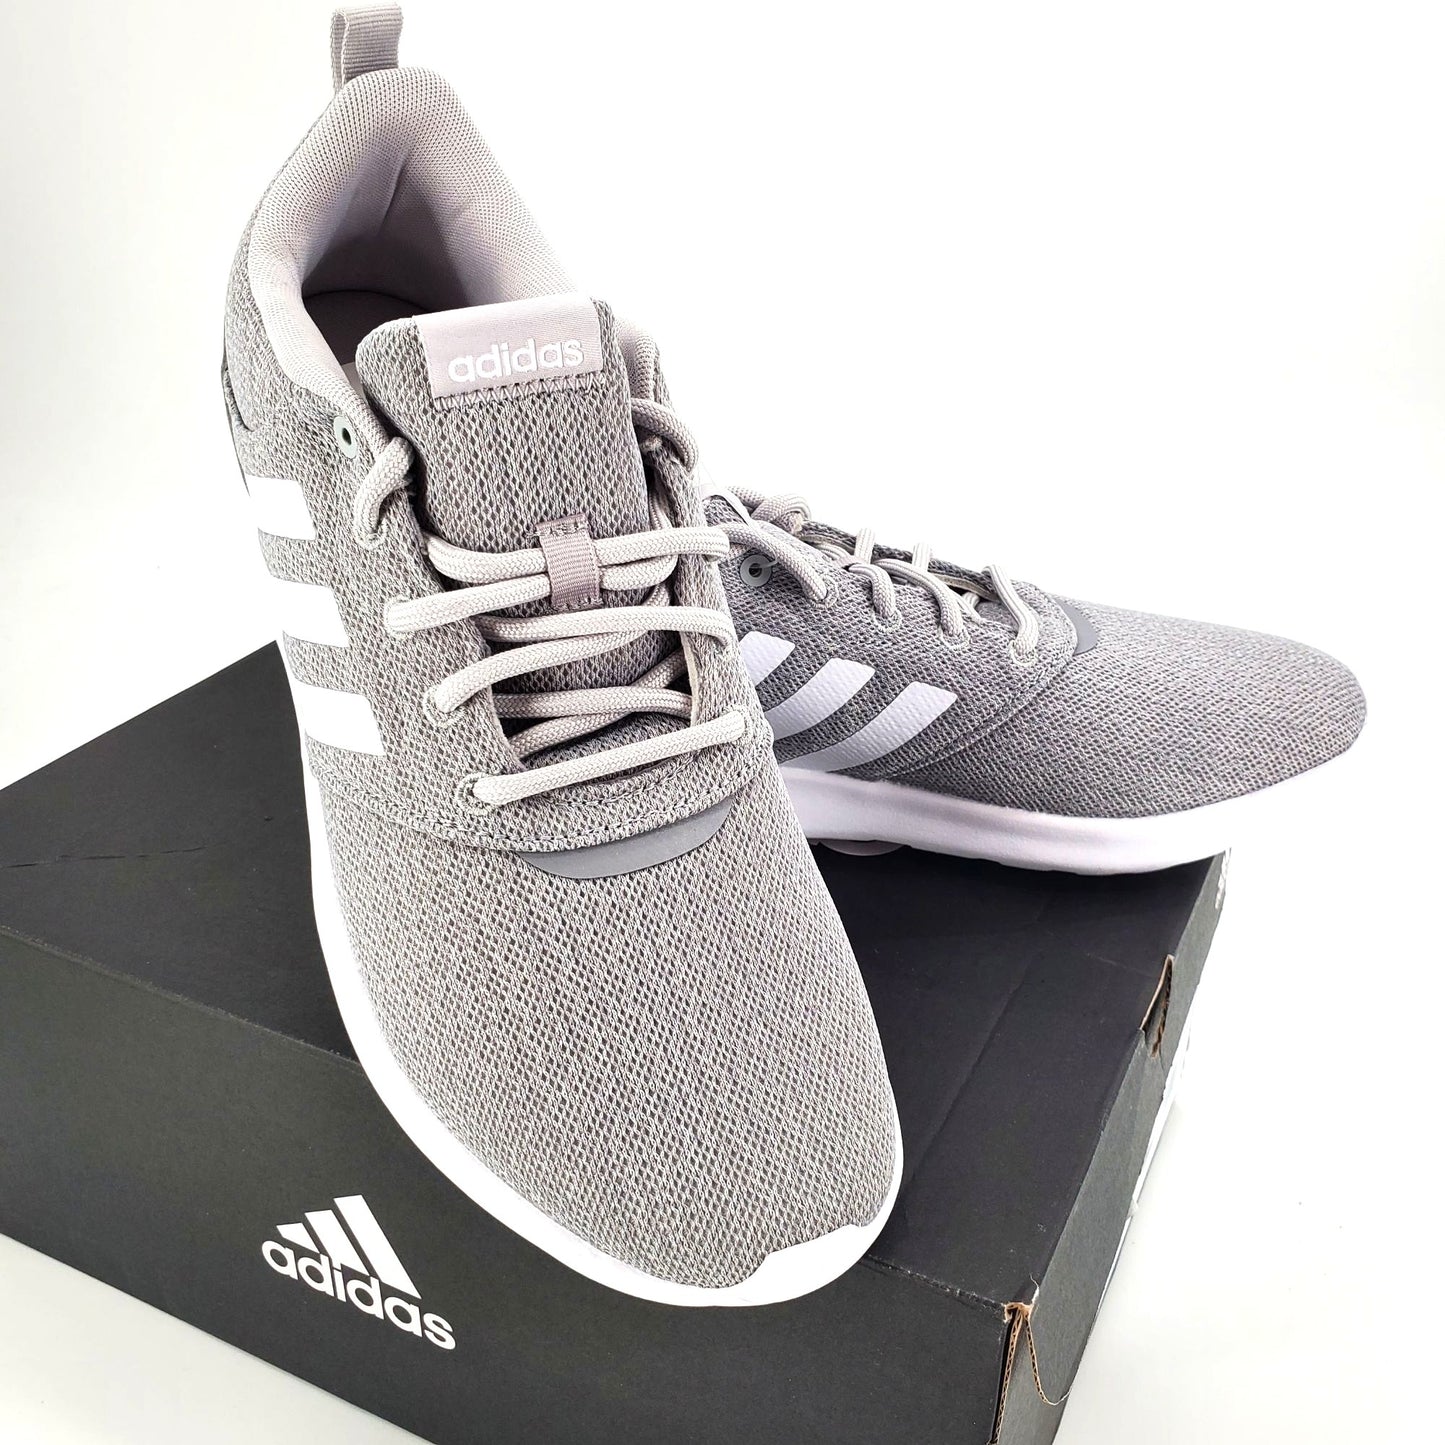 ADIDAS Sneakers Woman’s 10 Cloudfoam QT Racer 2.0 Activewear Athletic Shoes Gray